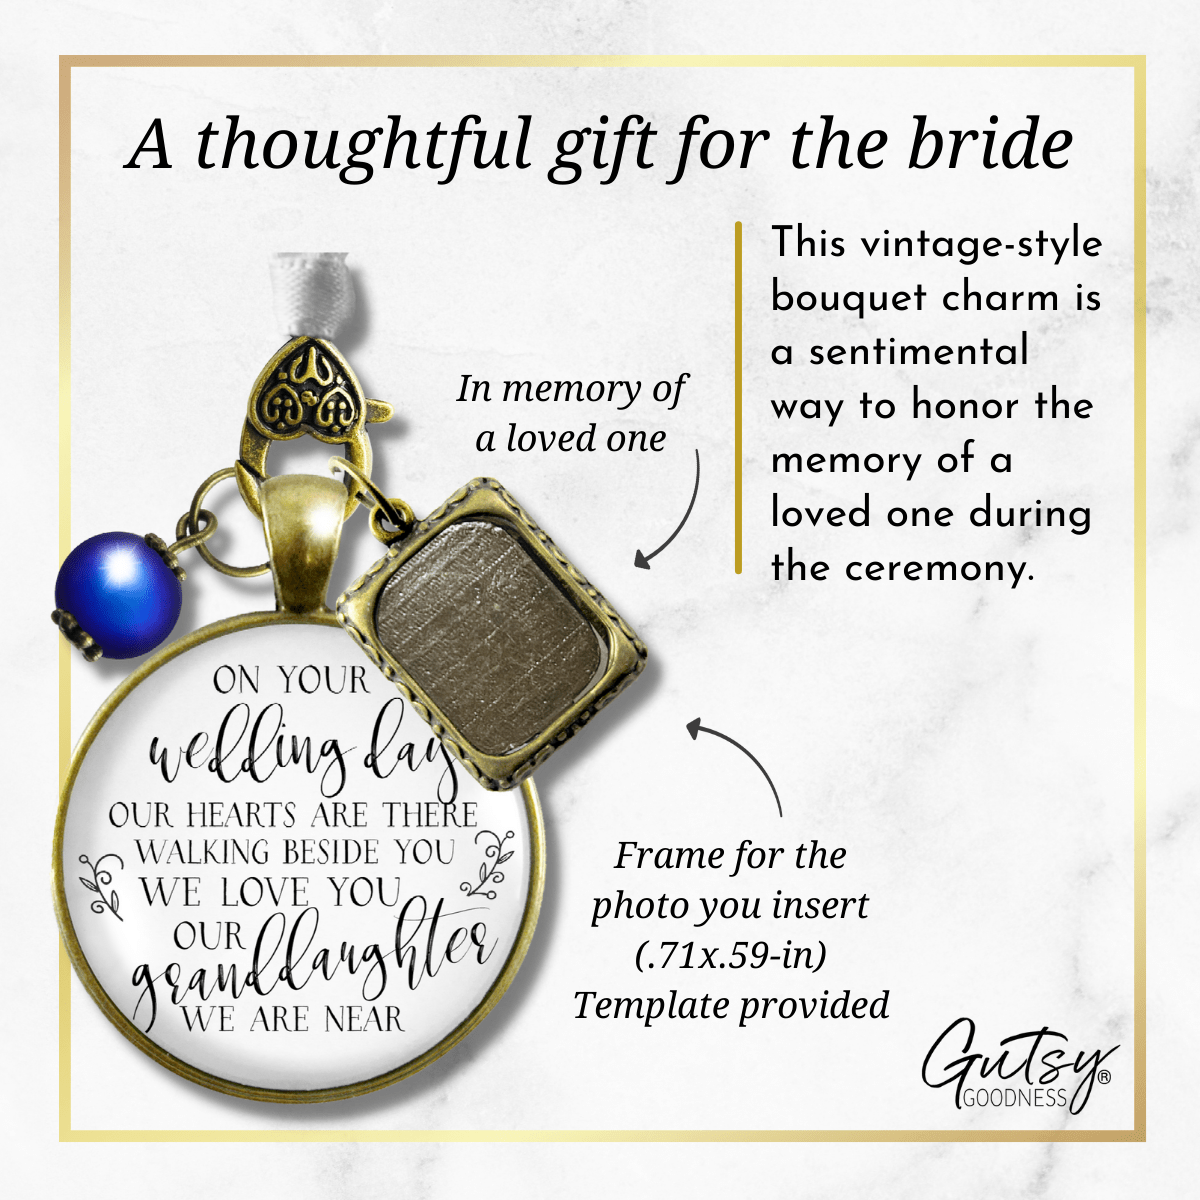 On Your Wedding Day OUR Heart Is There Walking Beside You GRANDDAUGHTER - BRONZE - WHITE - BLUE BEAD